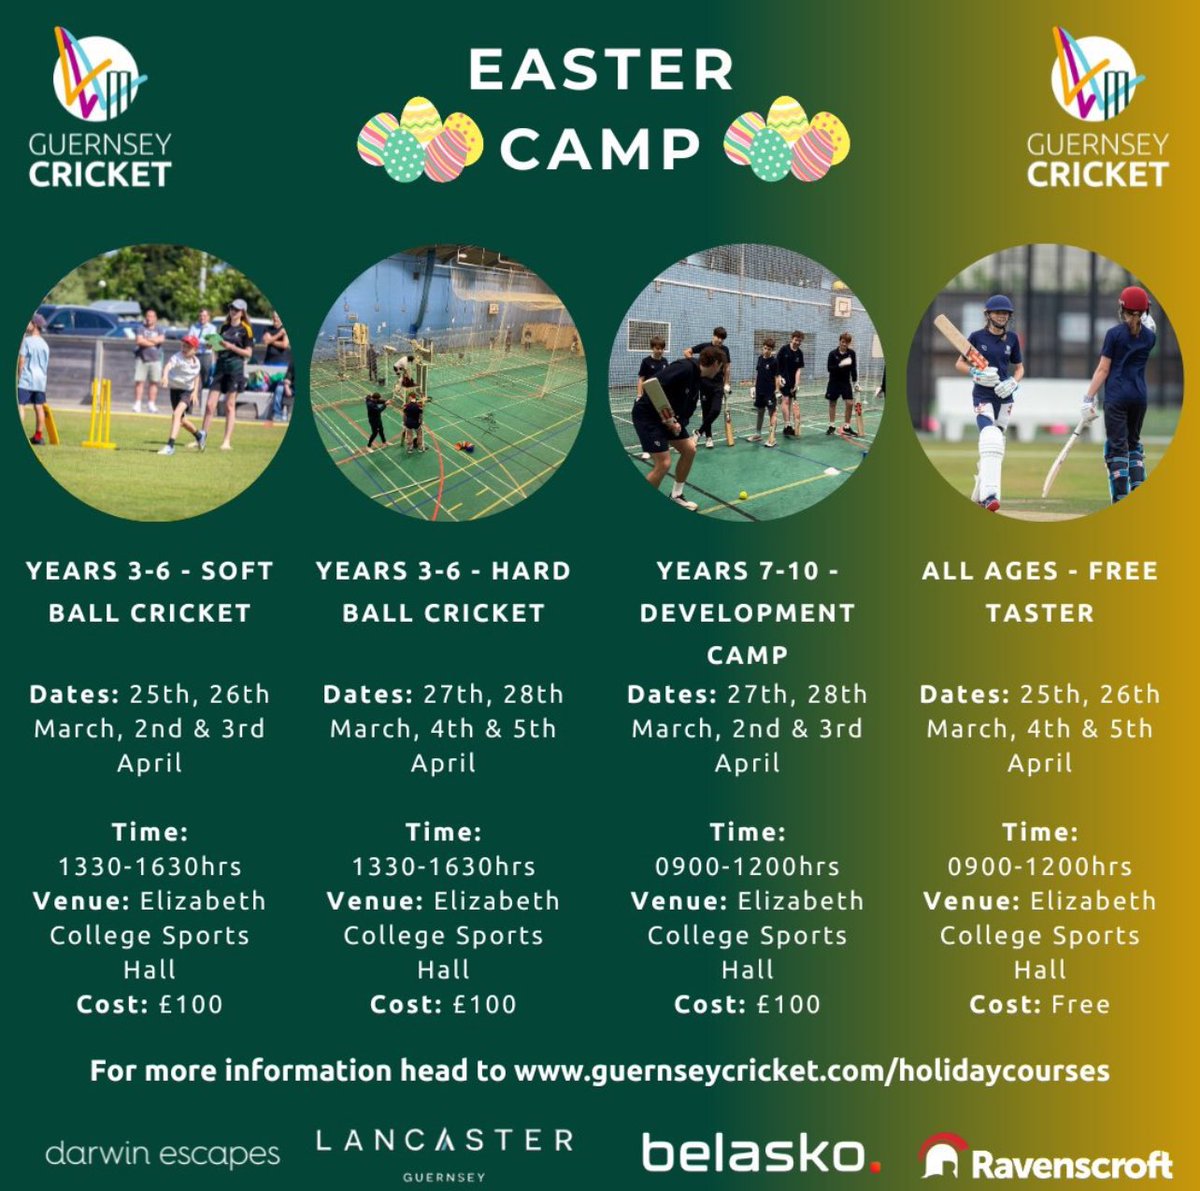 FREE TASTER SESSIONS - Easter As part of our holiday camps we’ll be offering free sessions for primary and secondary aged children to try the sport. For more details and info on our other activities this Easter click below 👇 guernseycricket.com/holidaycourses